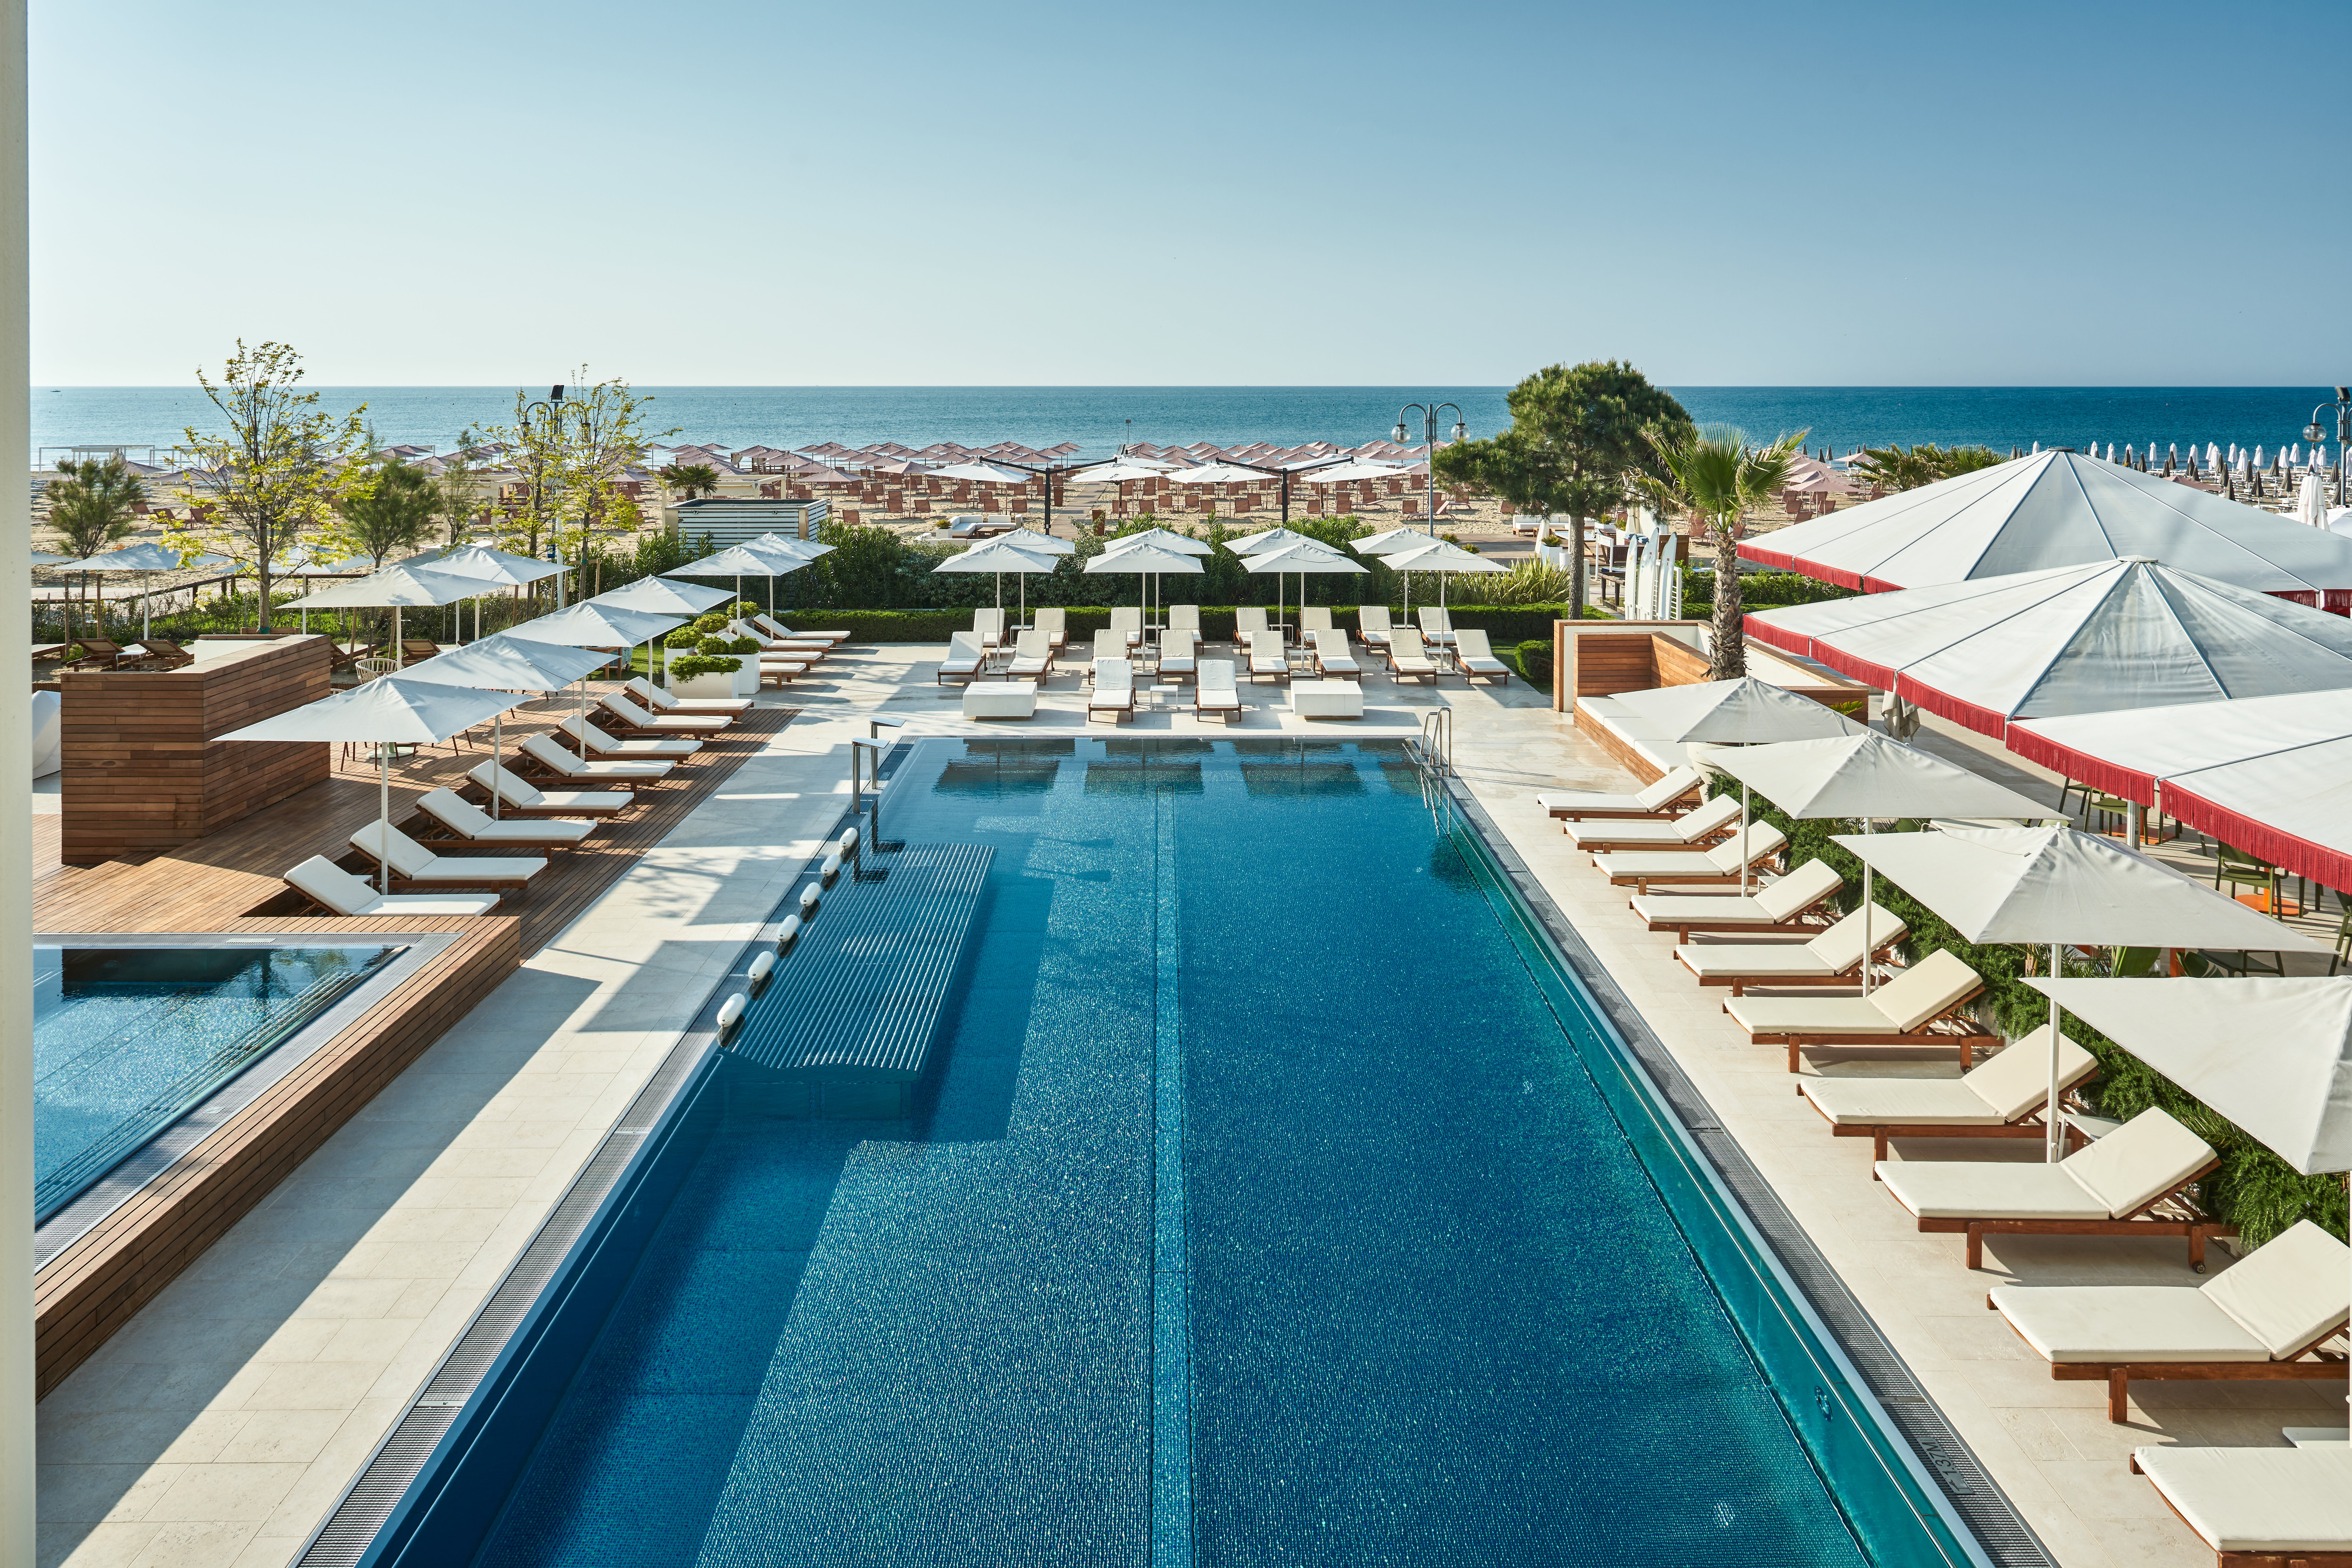 With a pool overlooking the sea Falkensteiner Hotel and Spa makes a lush getaway